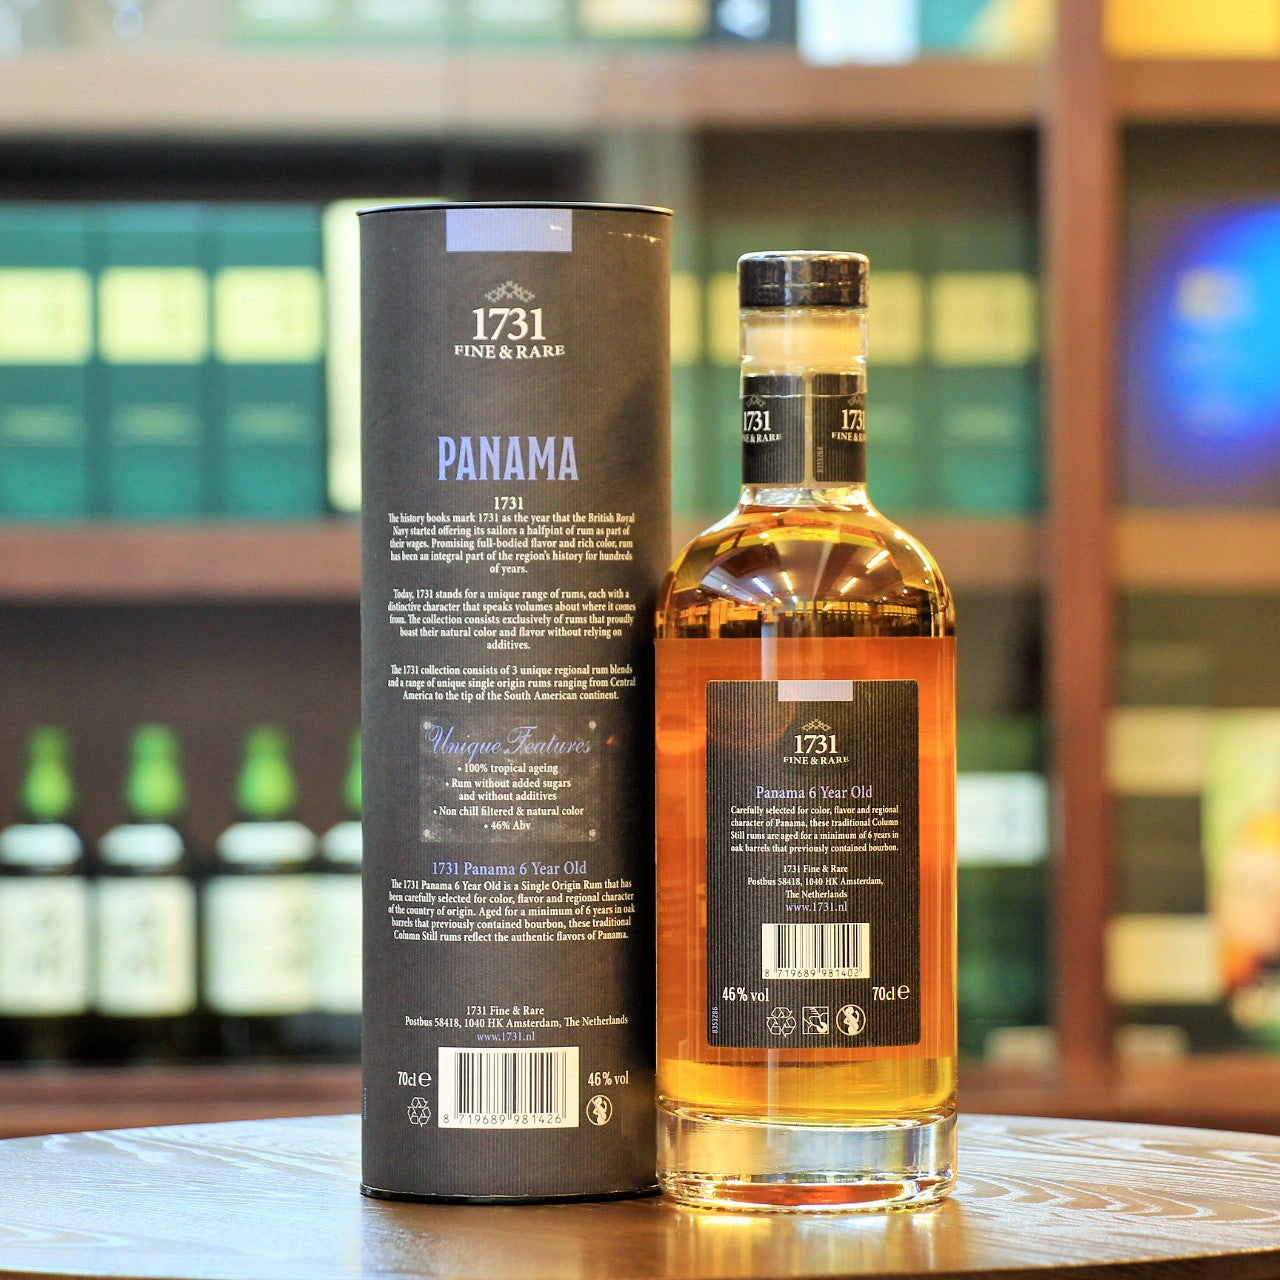 Distilled at Varela Hermanos Distillery in Panama and aged for a minimum of 6 years in ex-bourbon oak barrels, this blend of rum of Panama offers coffee beans, cacao, cherries and coconut on the nose with a long yet slightly spicy finish. Upfront subtle sweetness changes into earthy spices. Nose: Spices, coffee beans, cherries, cacao and coconut Palate: Coconut, sweet berries, cherries, chocolate Finish: Long, spicy and sweet finish..